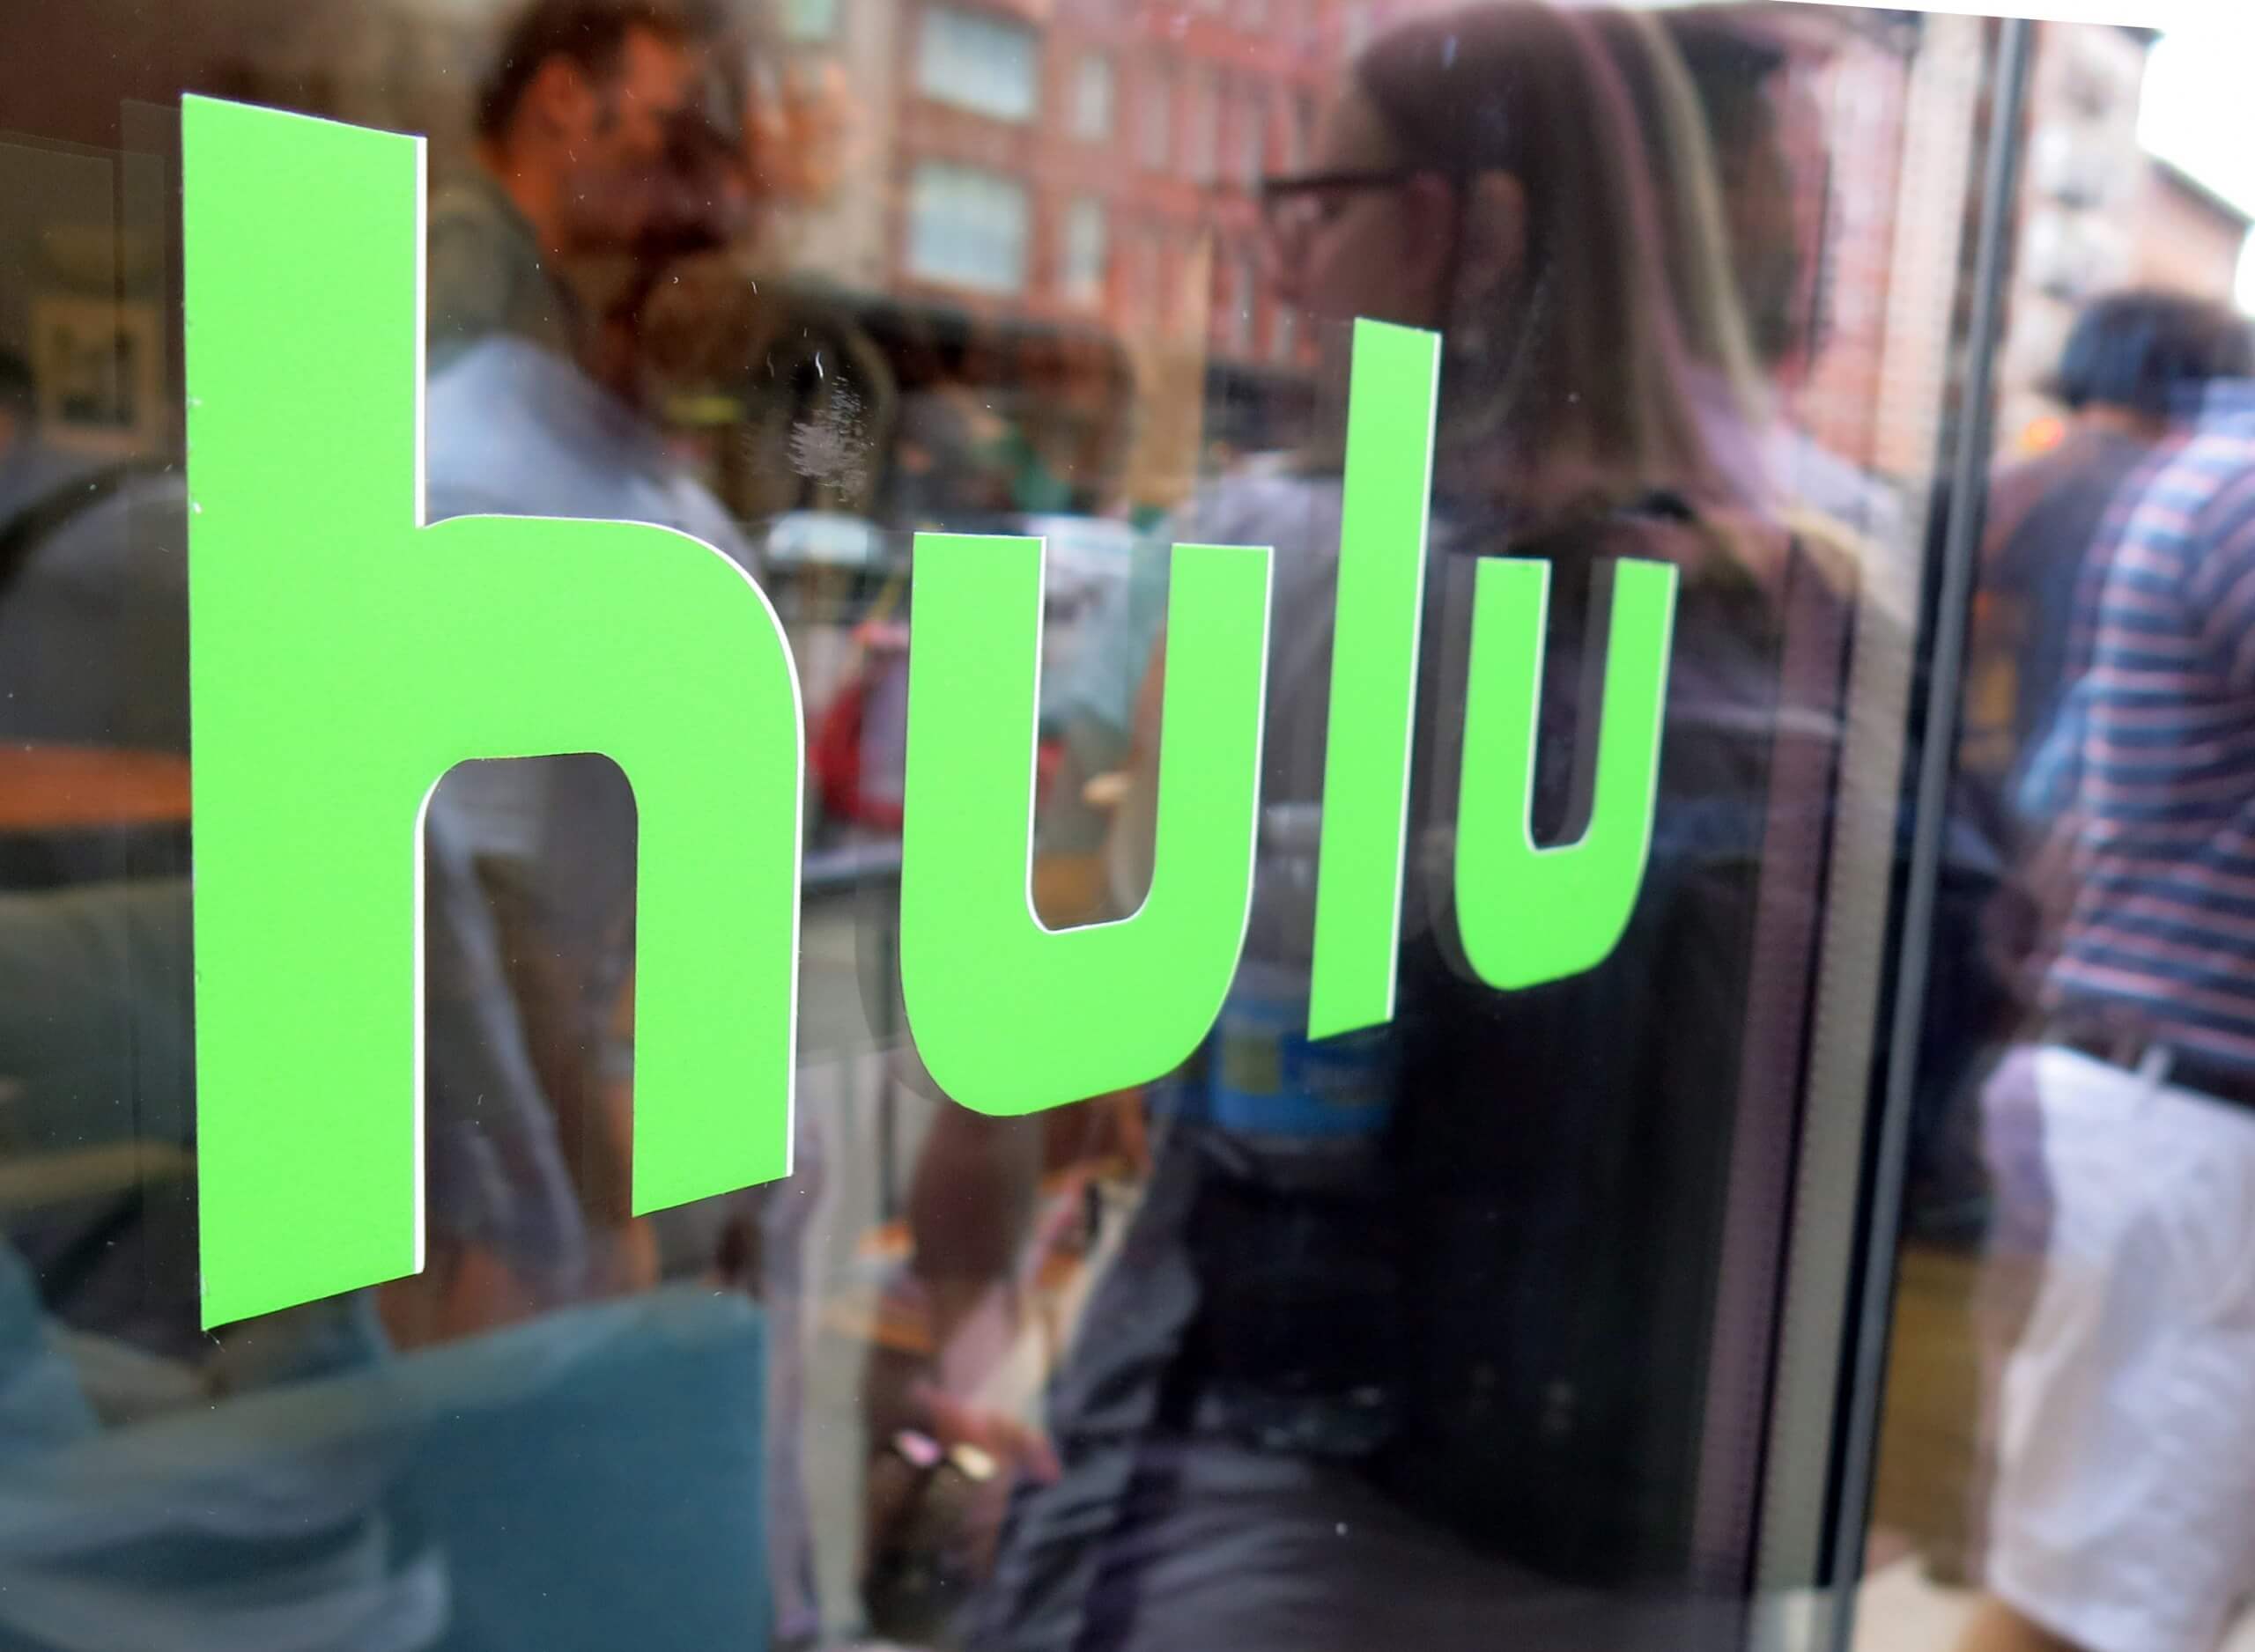 Hulu to introduce pause advertising 'experience' in Q2 2019